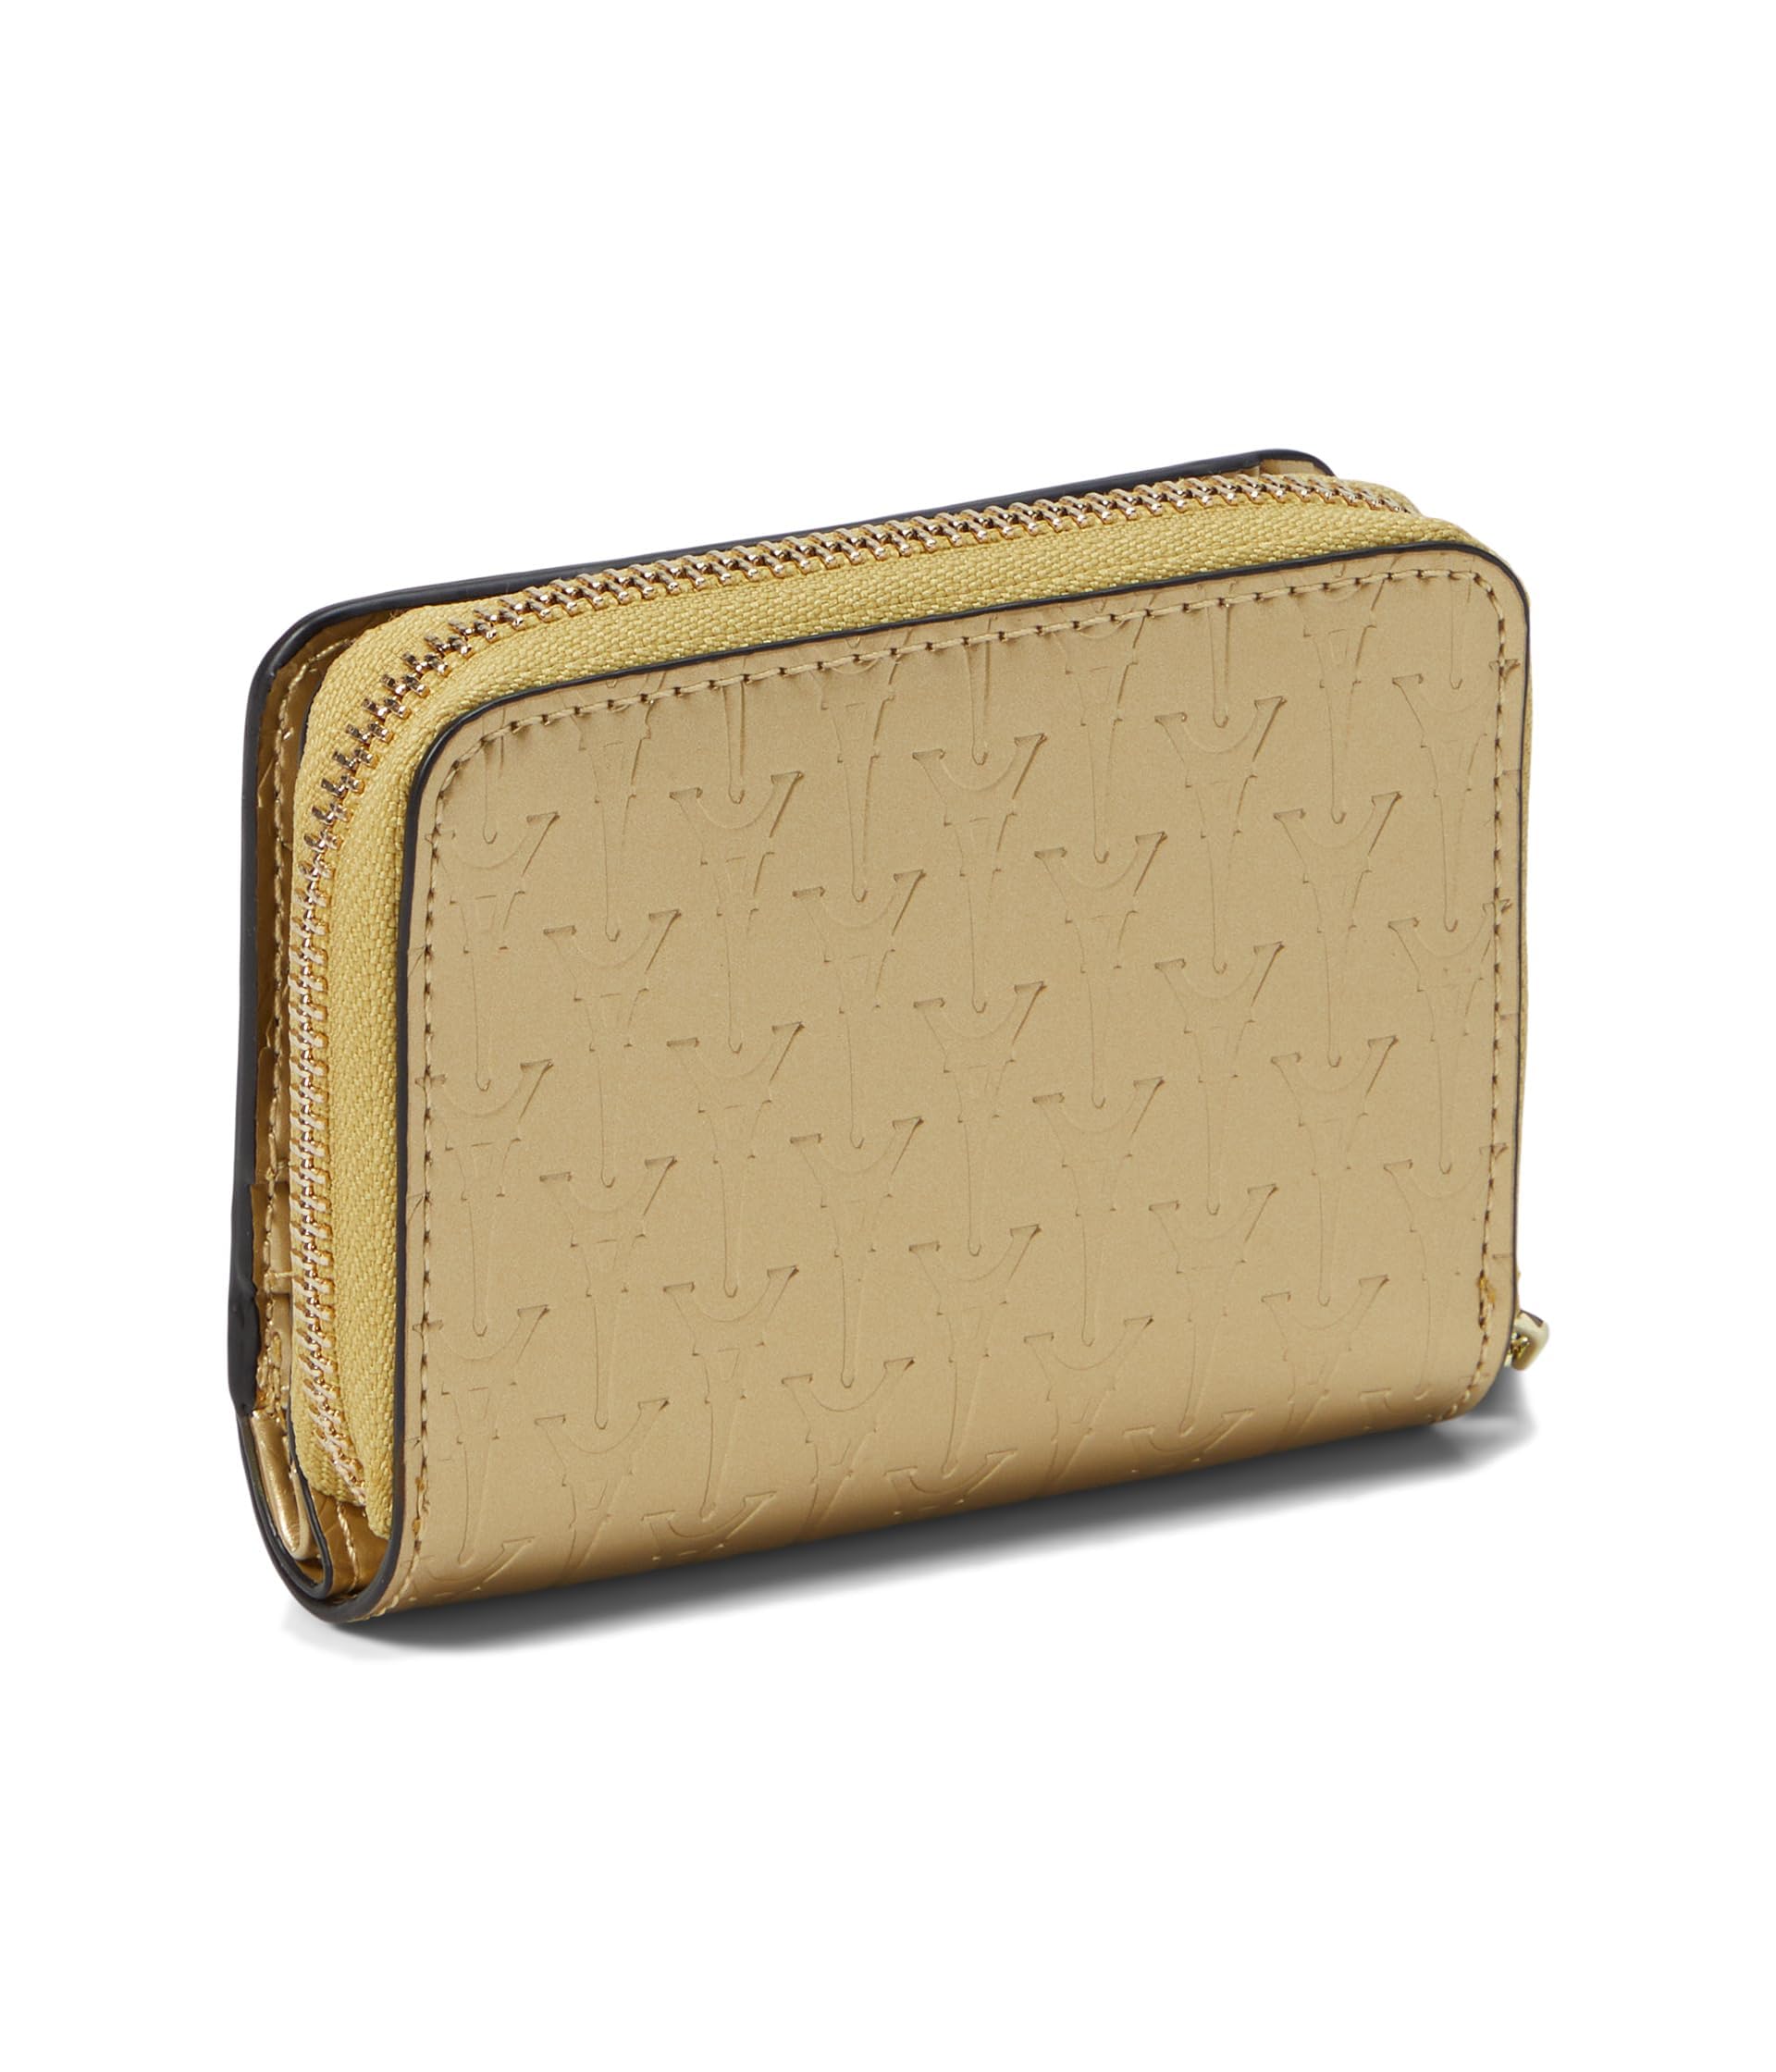 Karl Lagerfeld Paris Everyday Casual SLG Sm Wallet, Gold